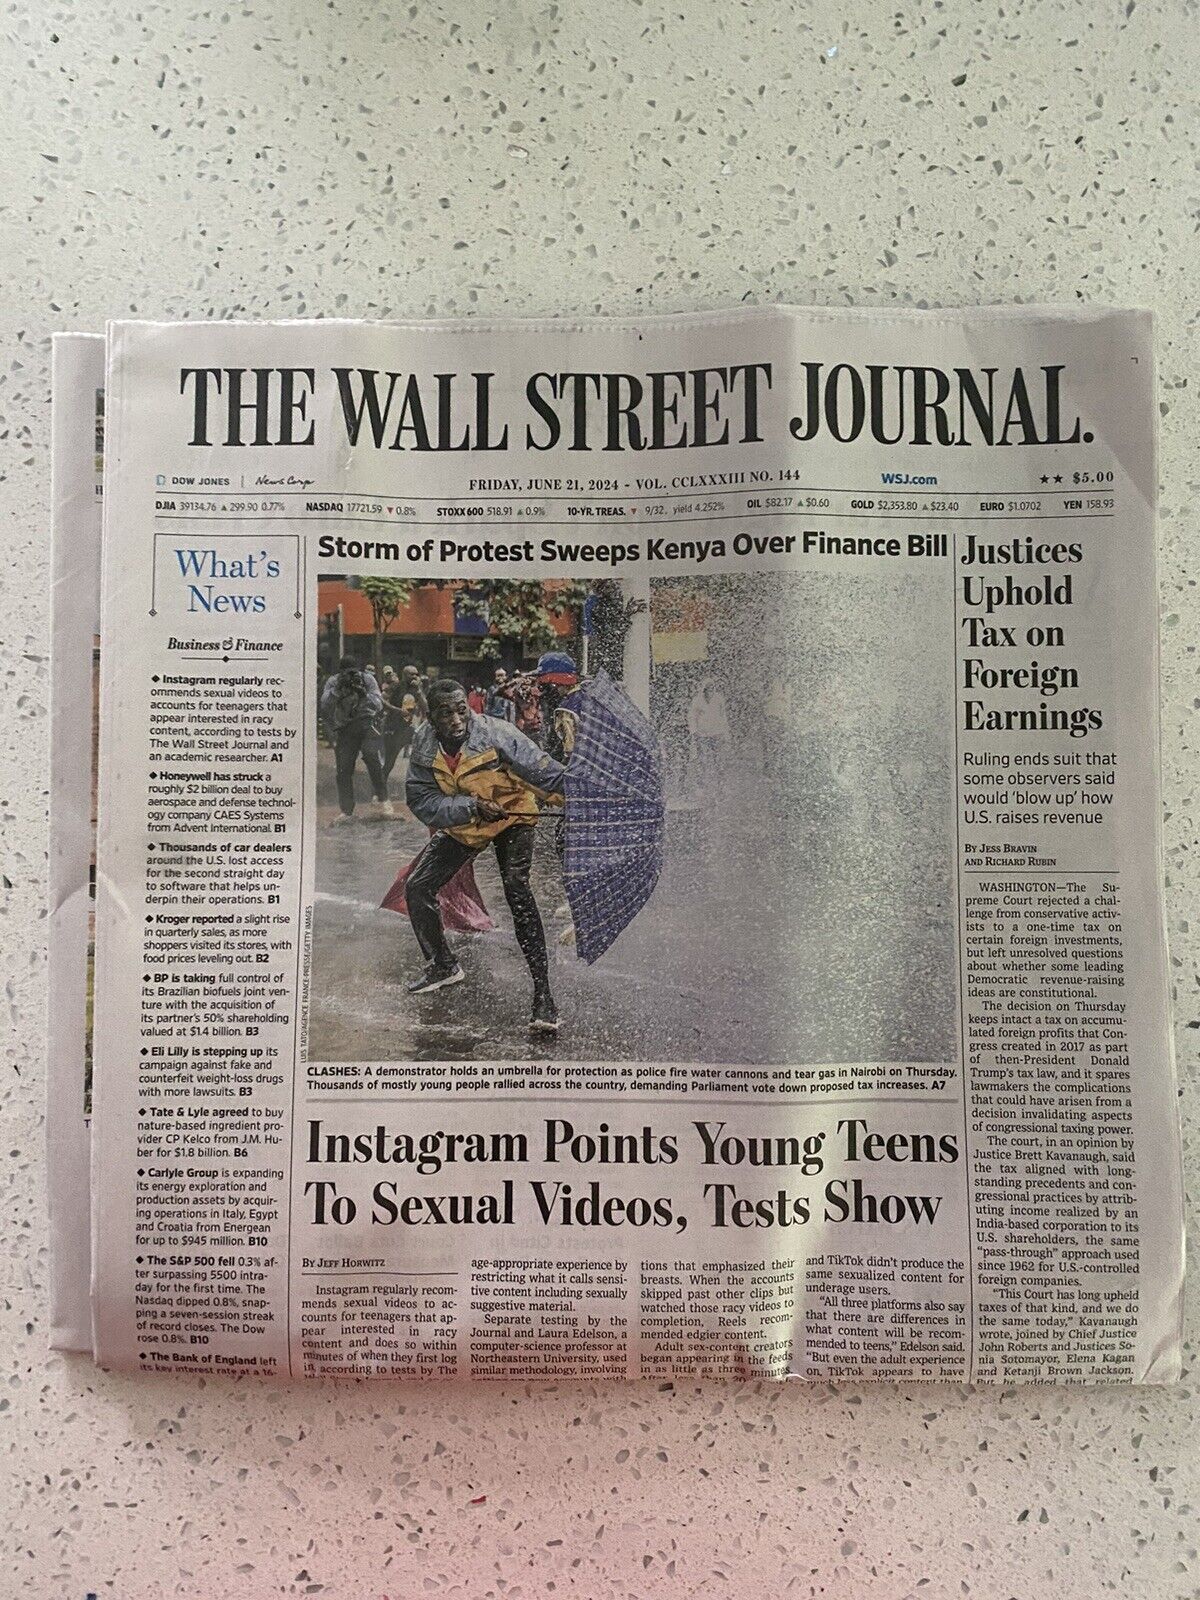 The Wall Street Journal Friday, June 21, 2024 Complete Print Newspaper (NEW)